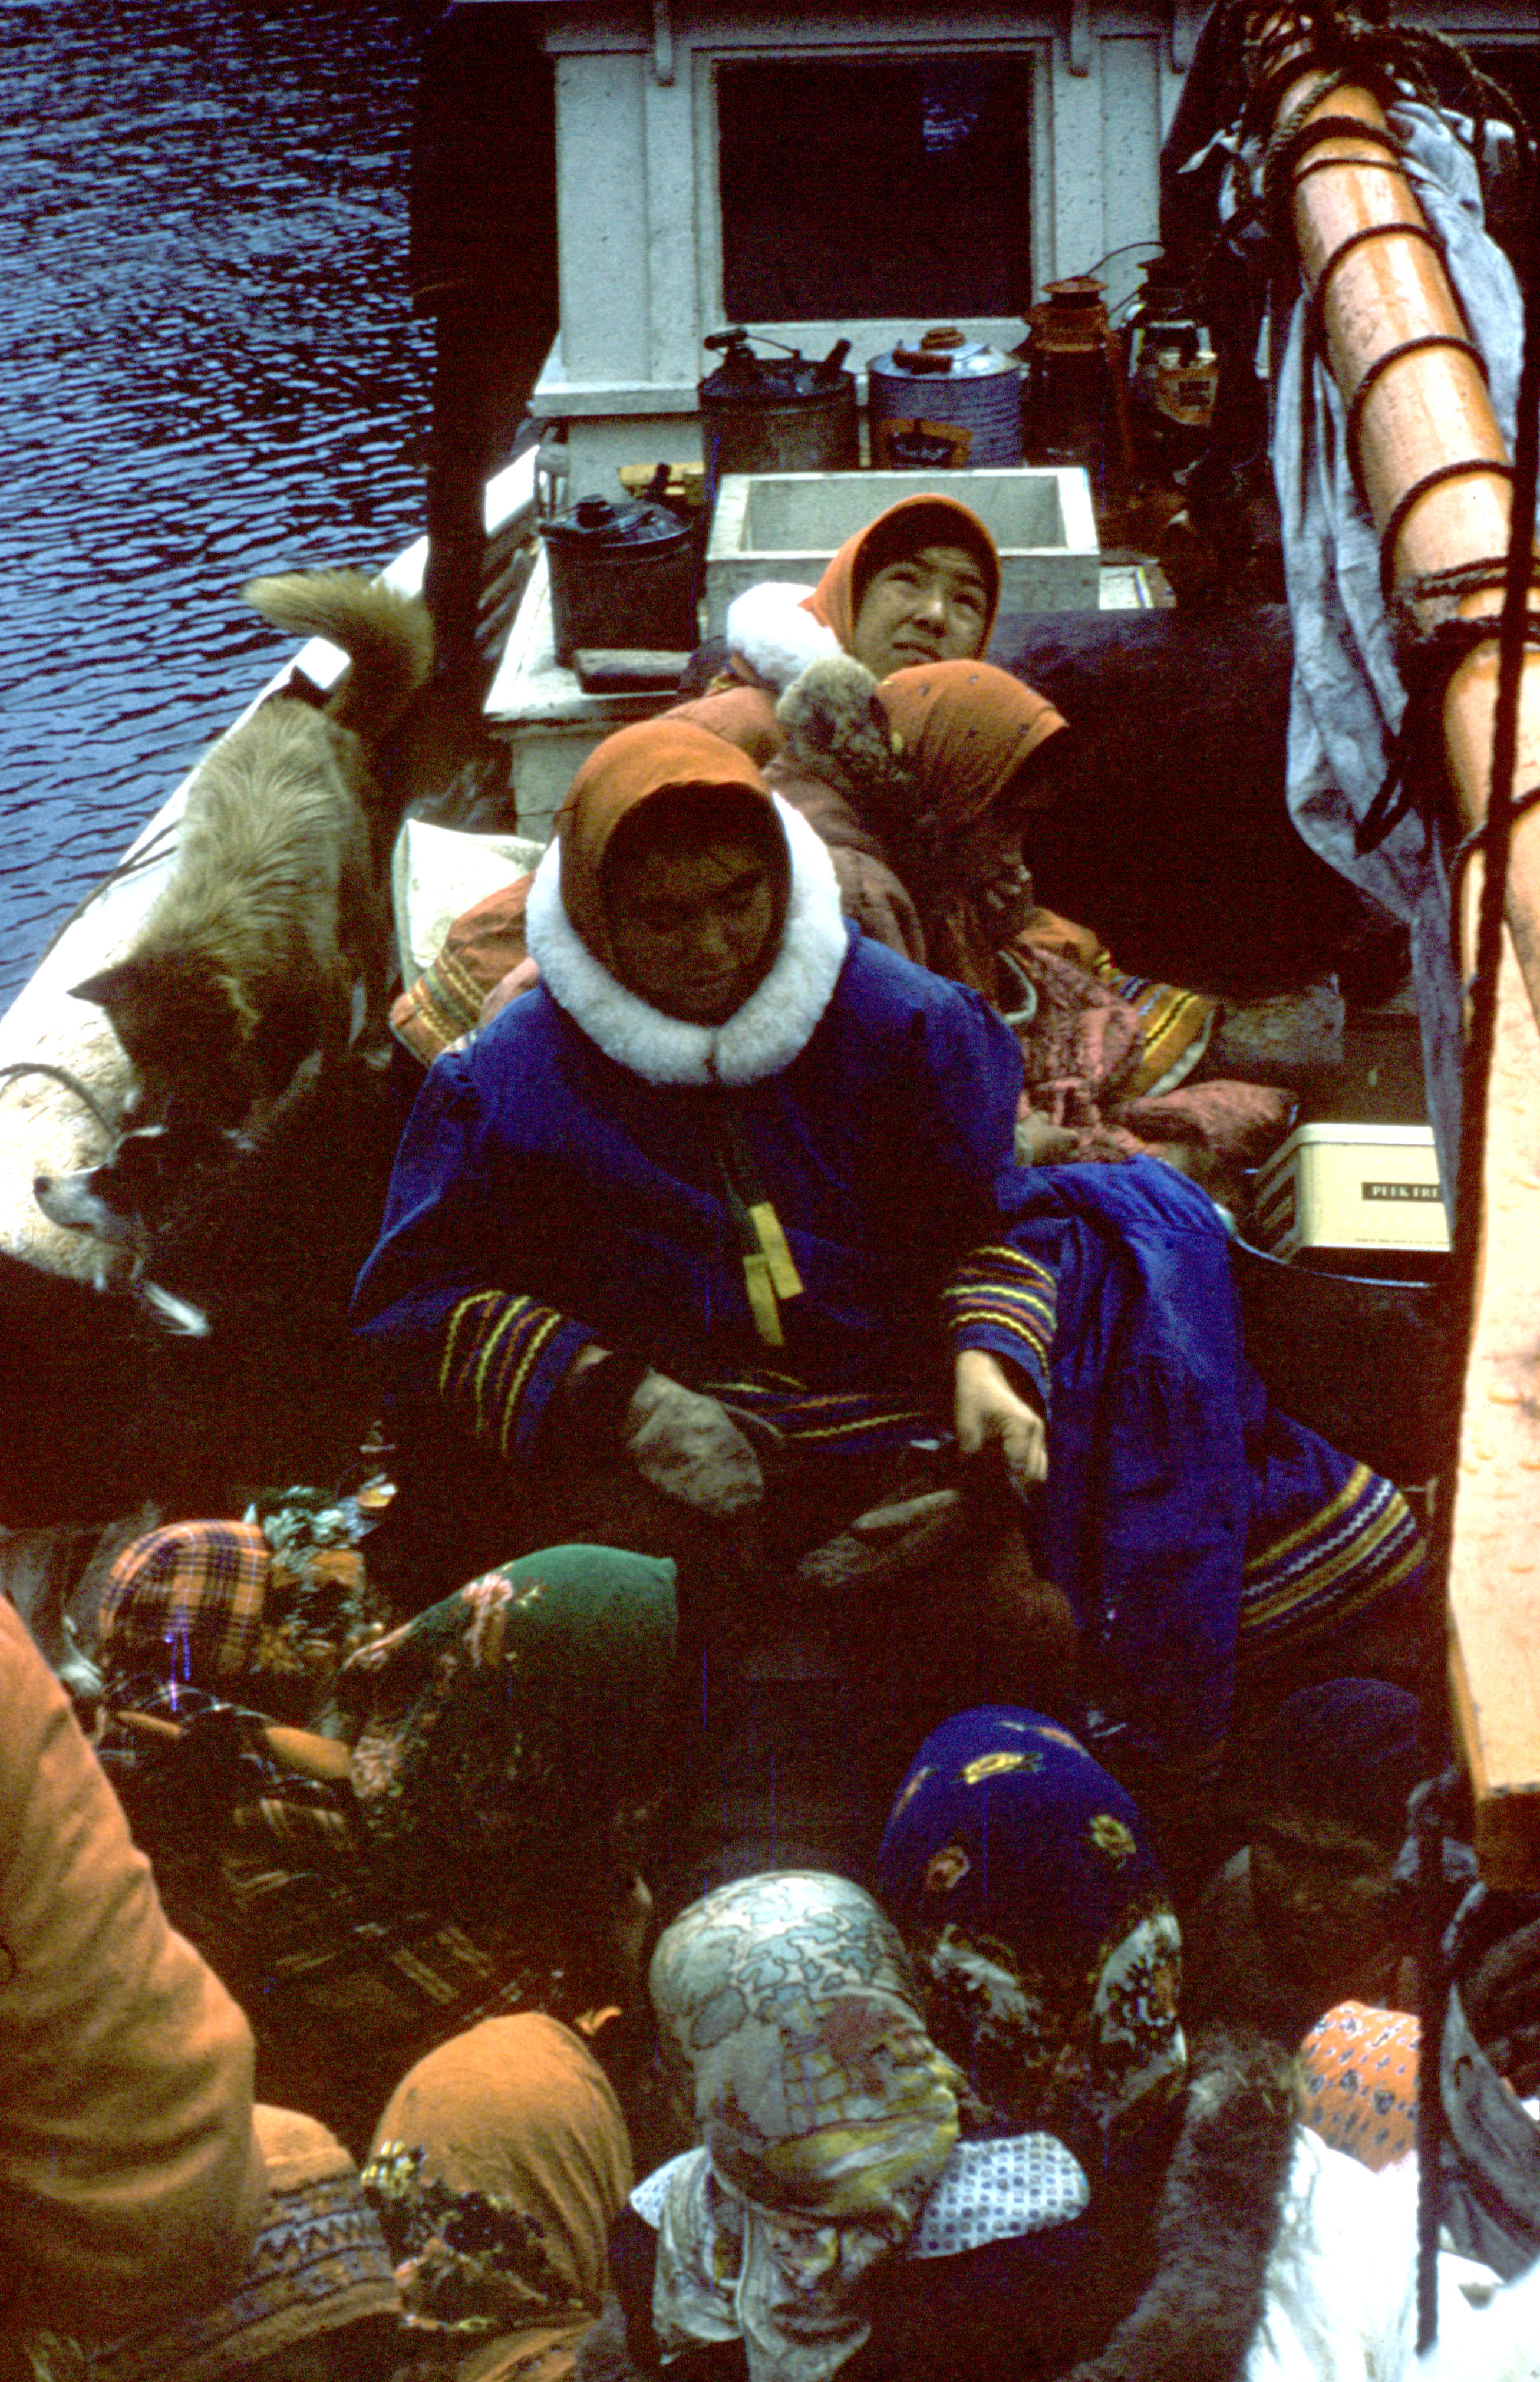 People, dogs, supplies all crammed onboard to support the Port Burwell char fishery, 1960